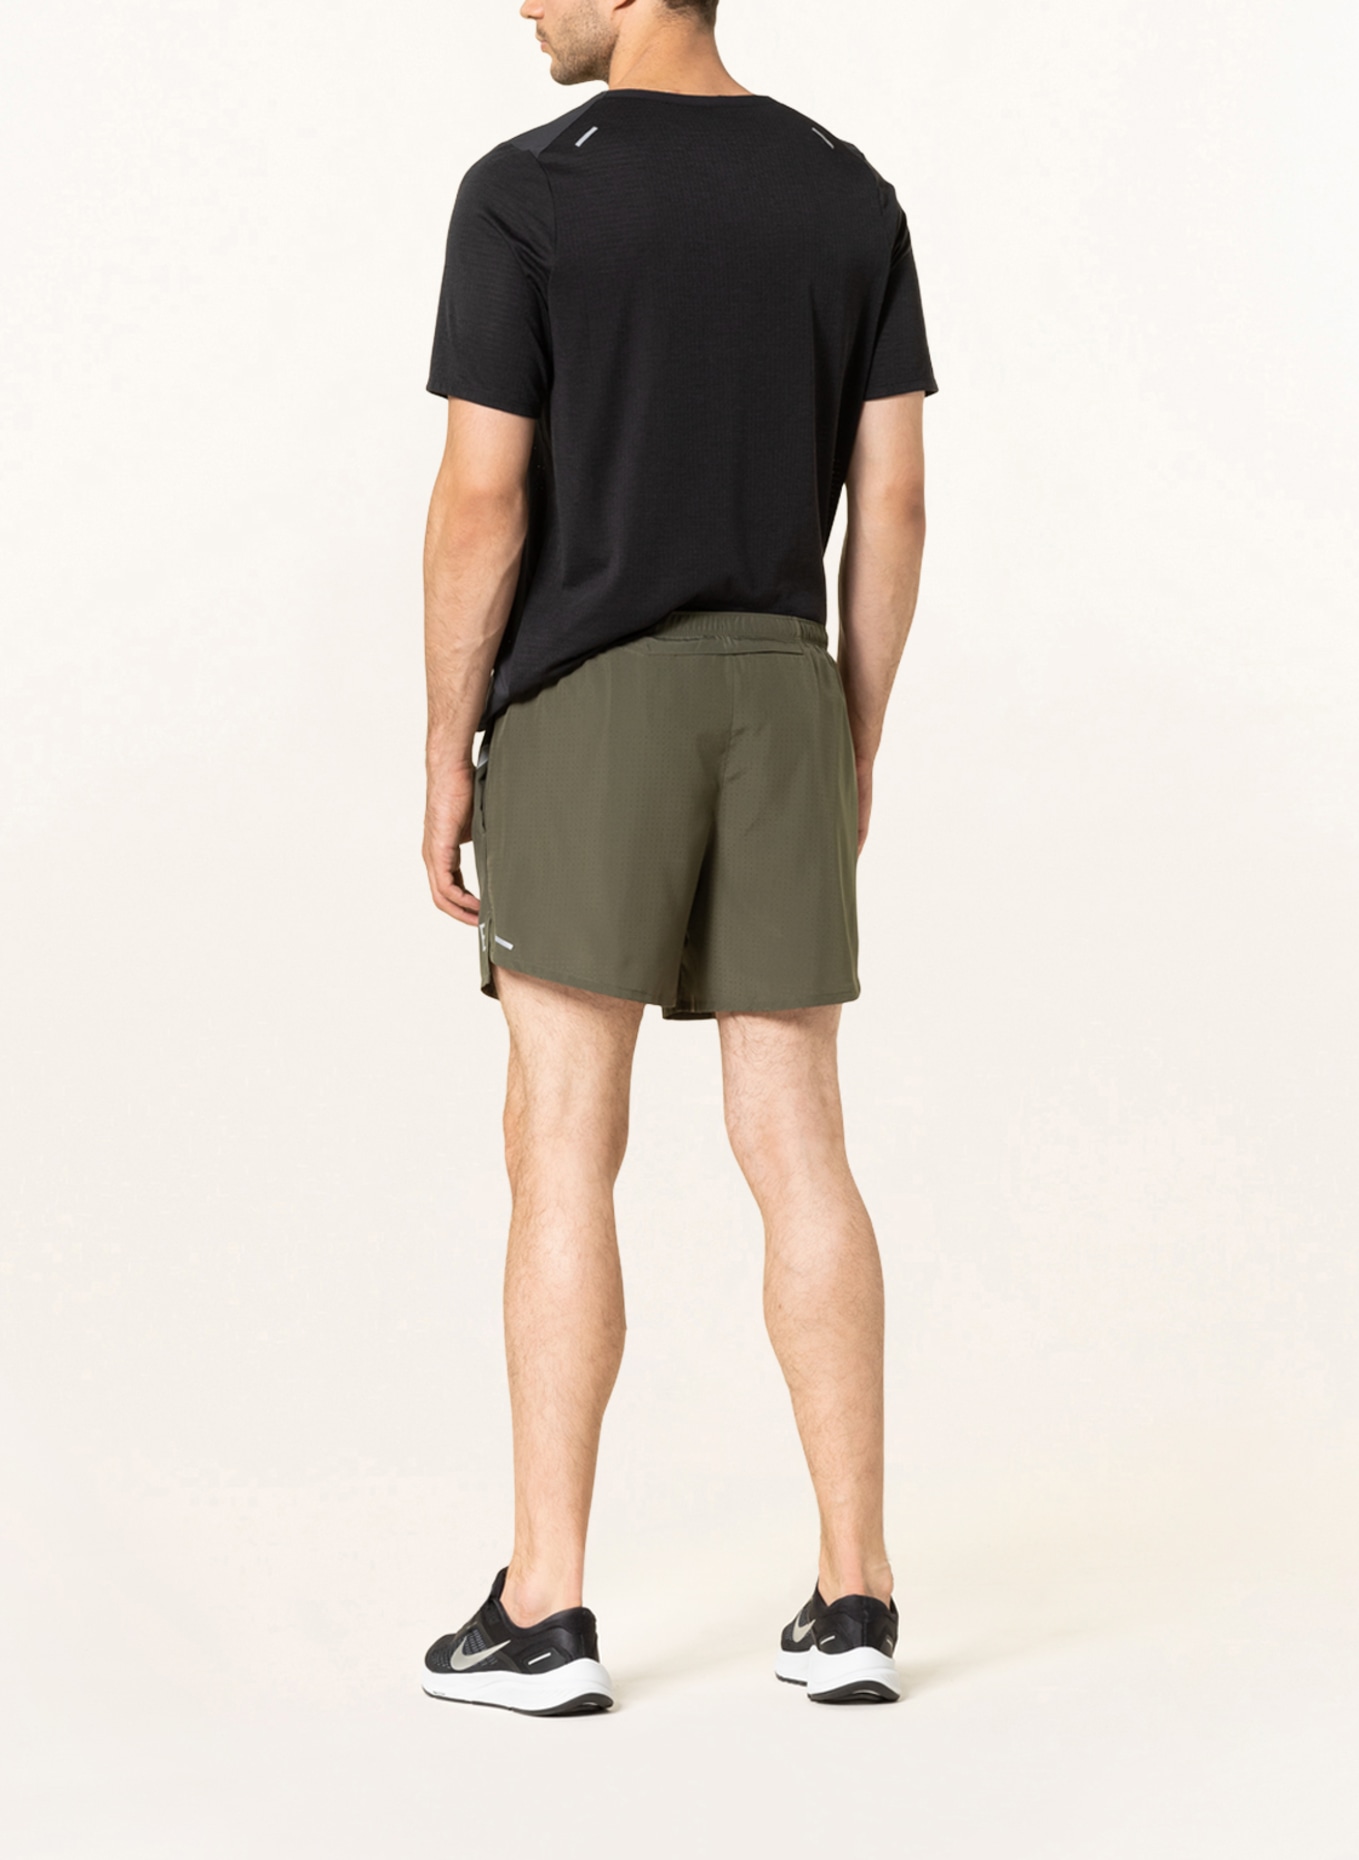 Nike 2-in-1 running shorts DRI-FIT CHALLENGER RUN DIVISION, Color: OLIVE (Image 3)